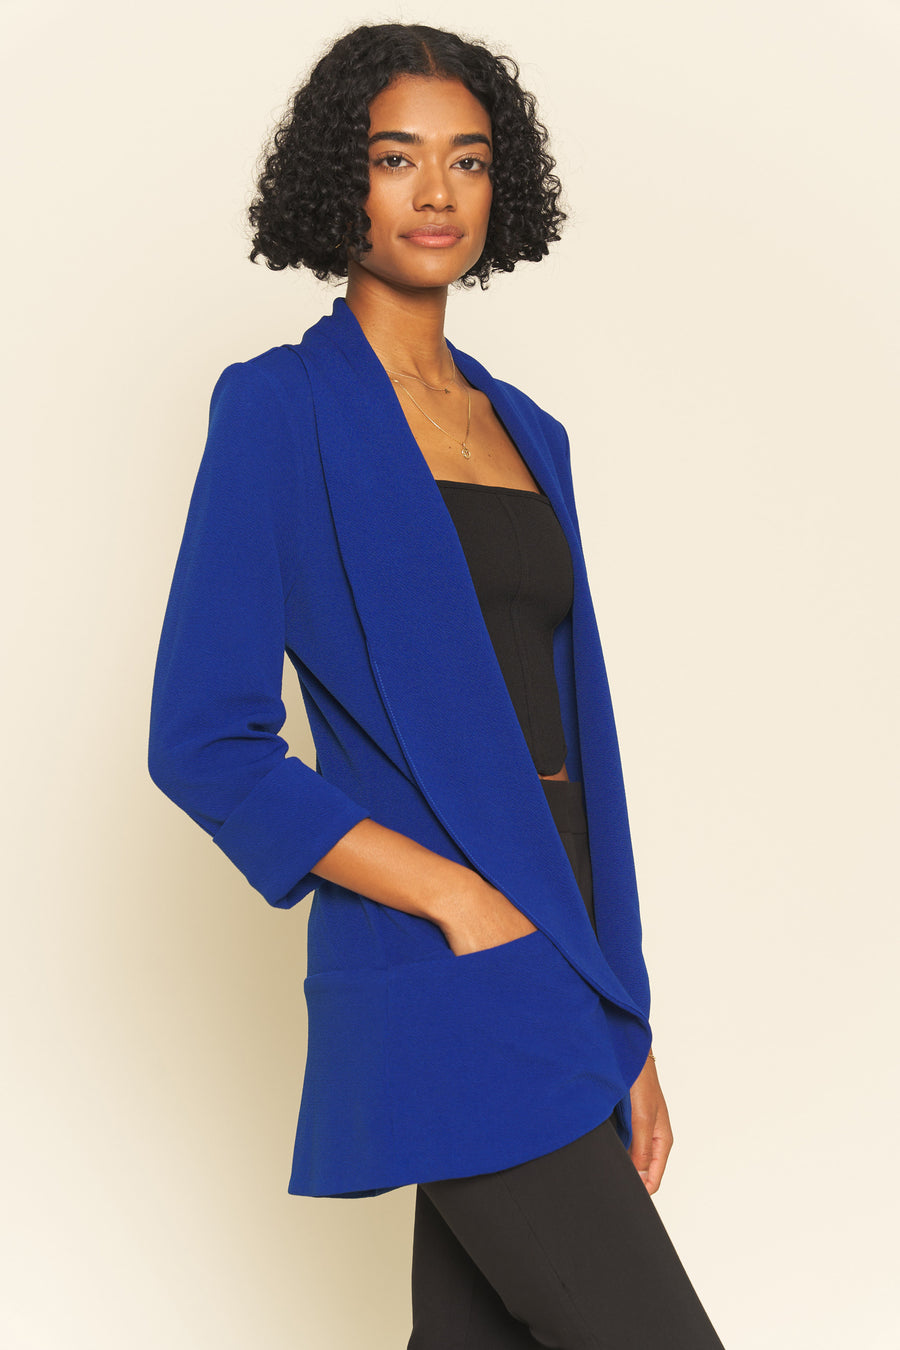 No Srcipt image - Images of 3 of 6 Lightweight Summer Fabric Classic Melanie Shawl Simple Staple Bright Royal Blue Color Workwear Blazer Jacket Everyday Shawl Front Pockets Office Wear Best Seller Customer Favorite